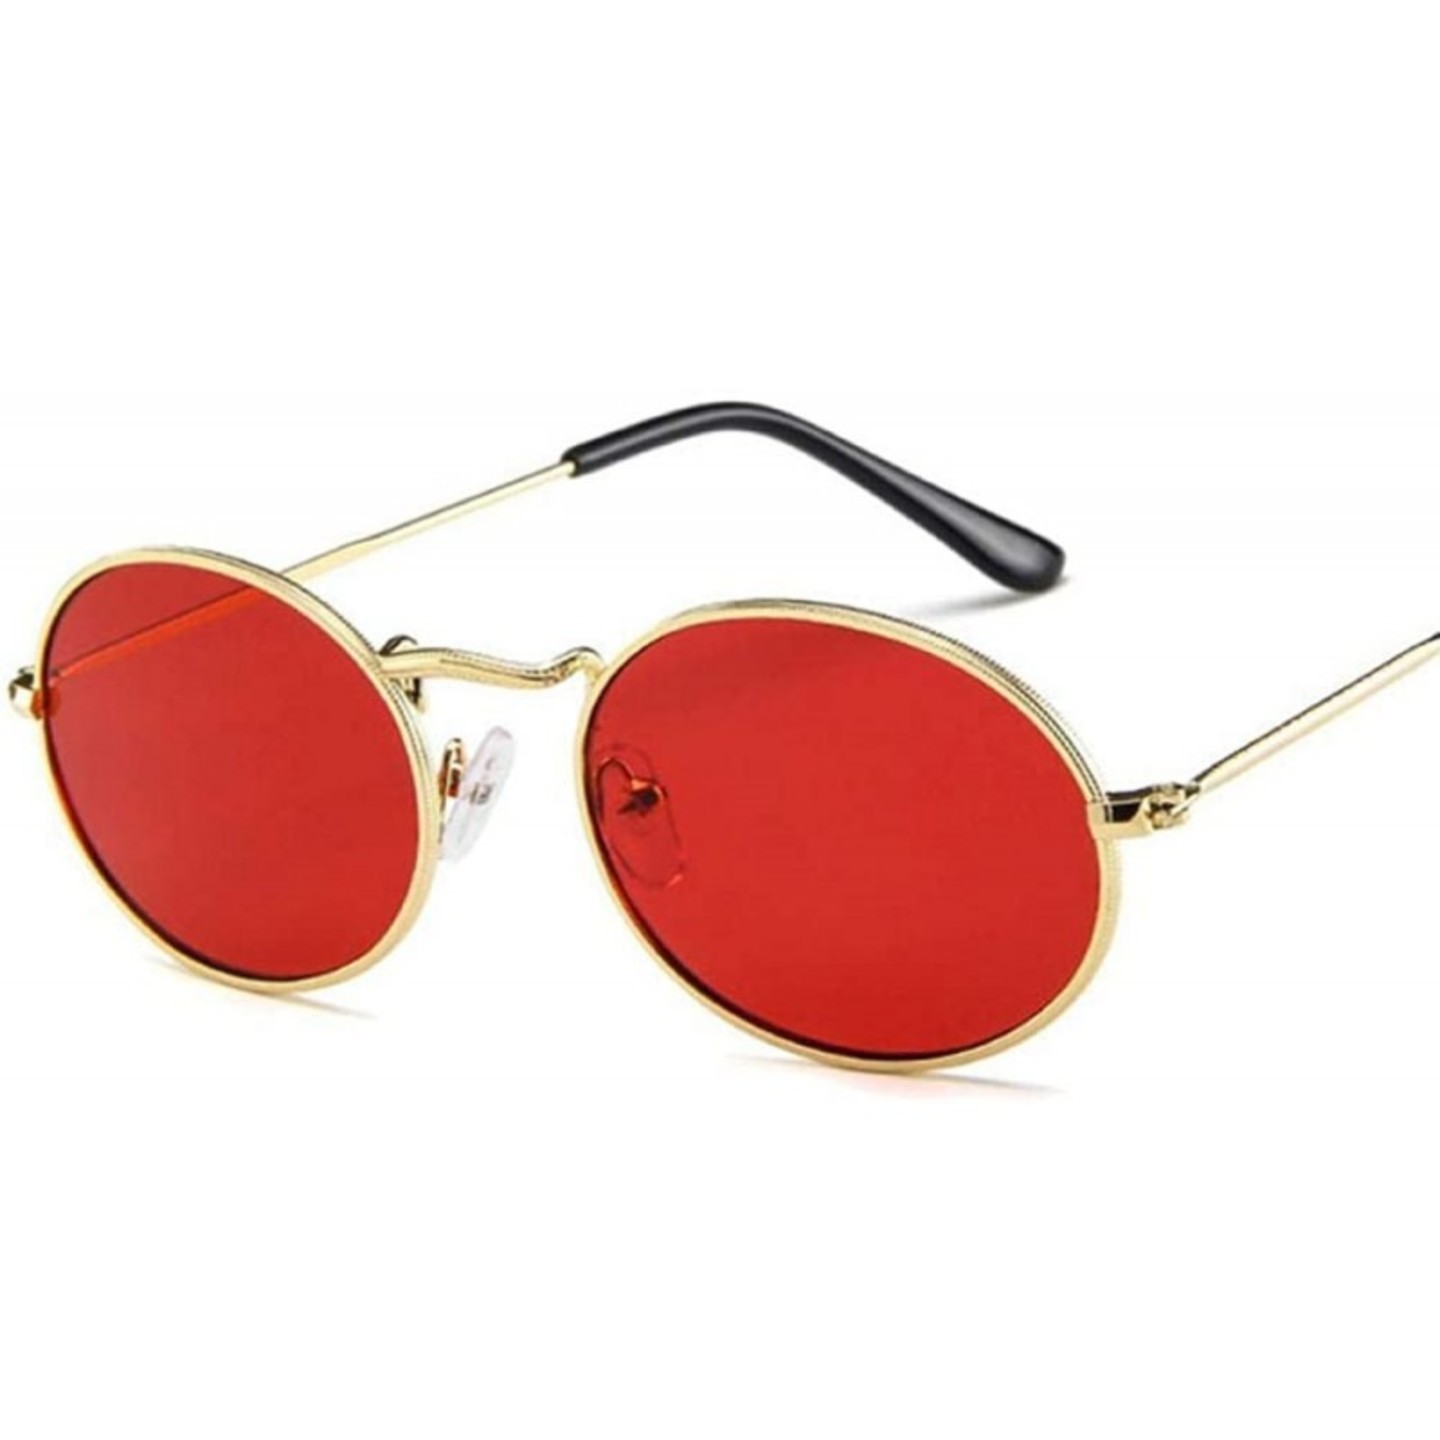 Gold Rimmed Maroon Color Sunglasses